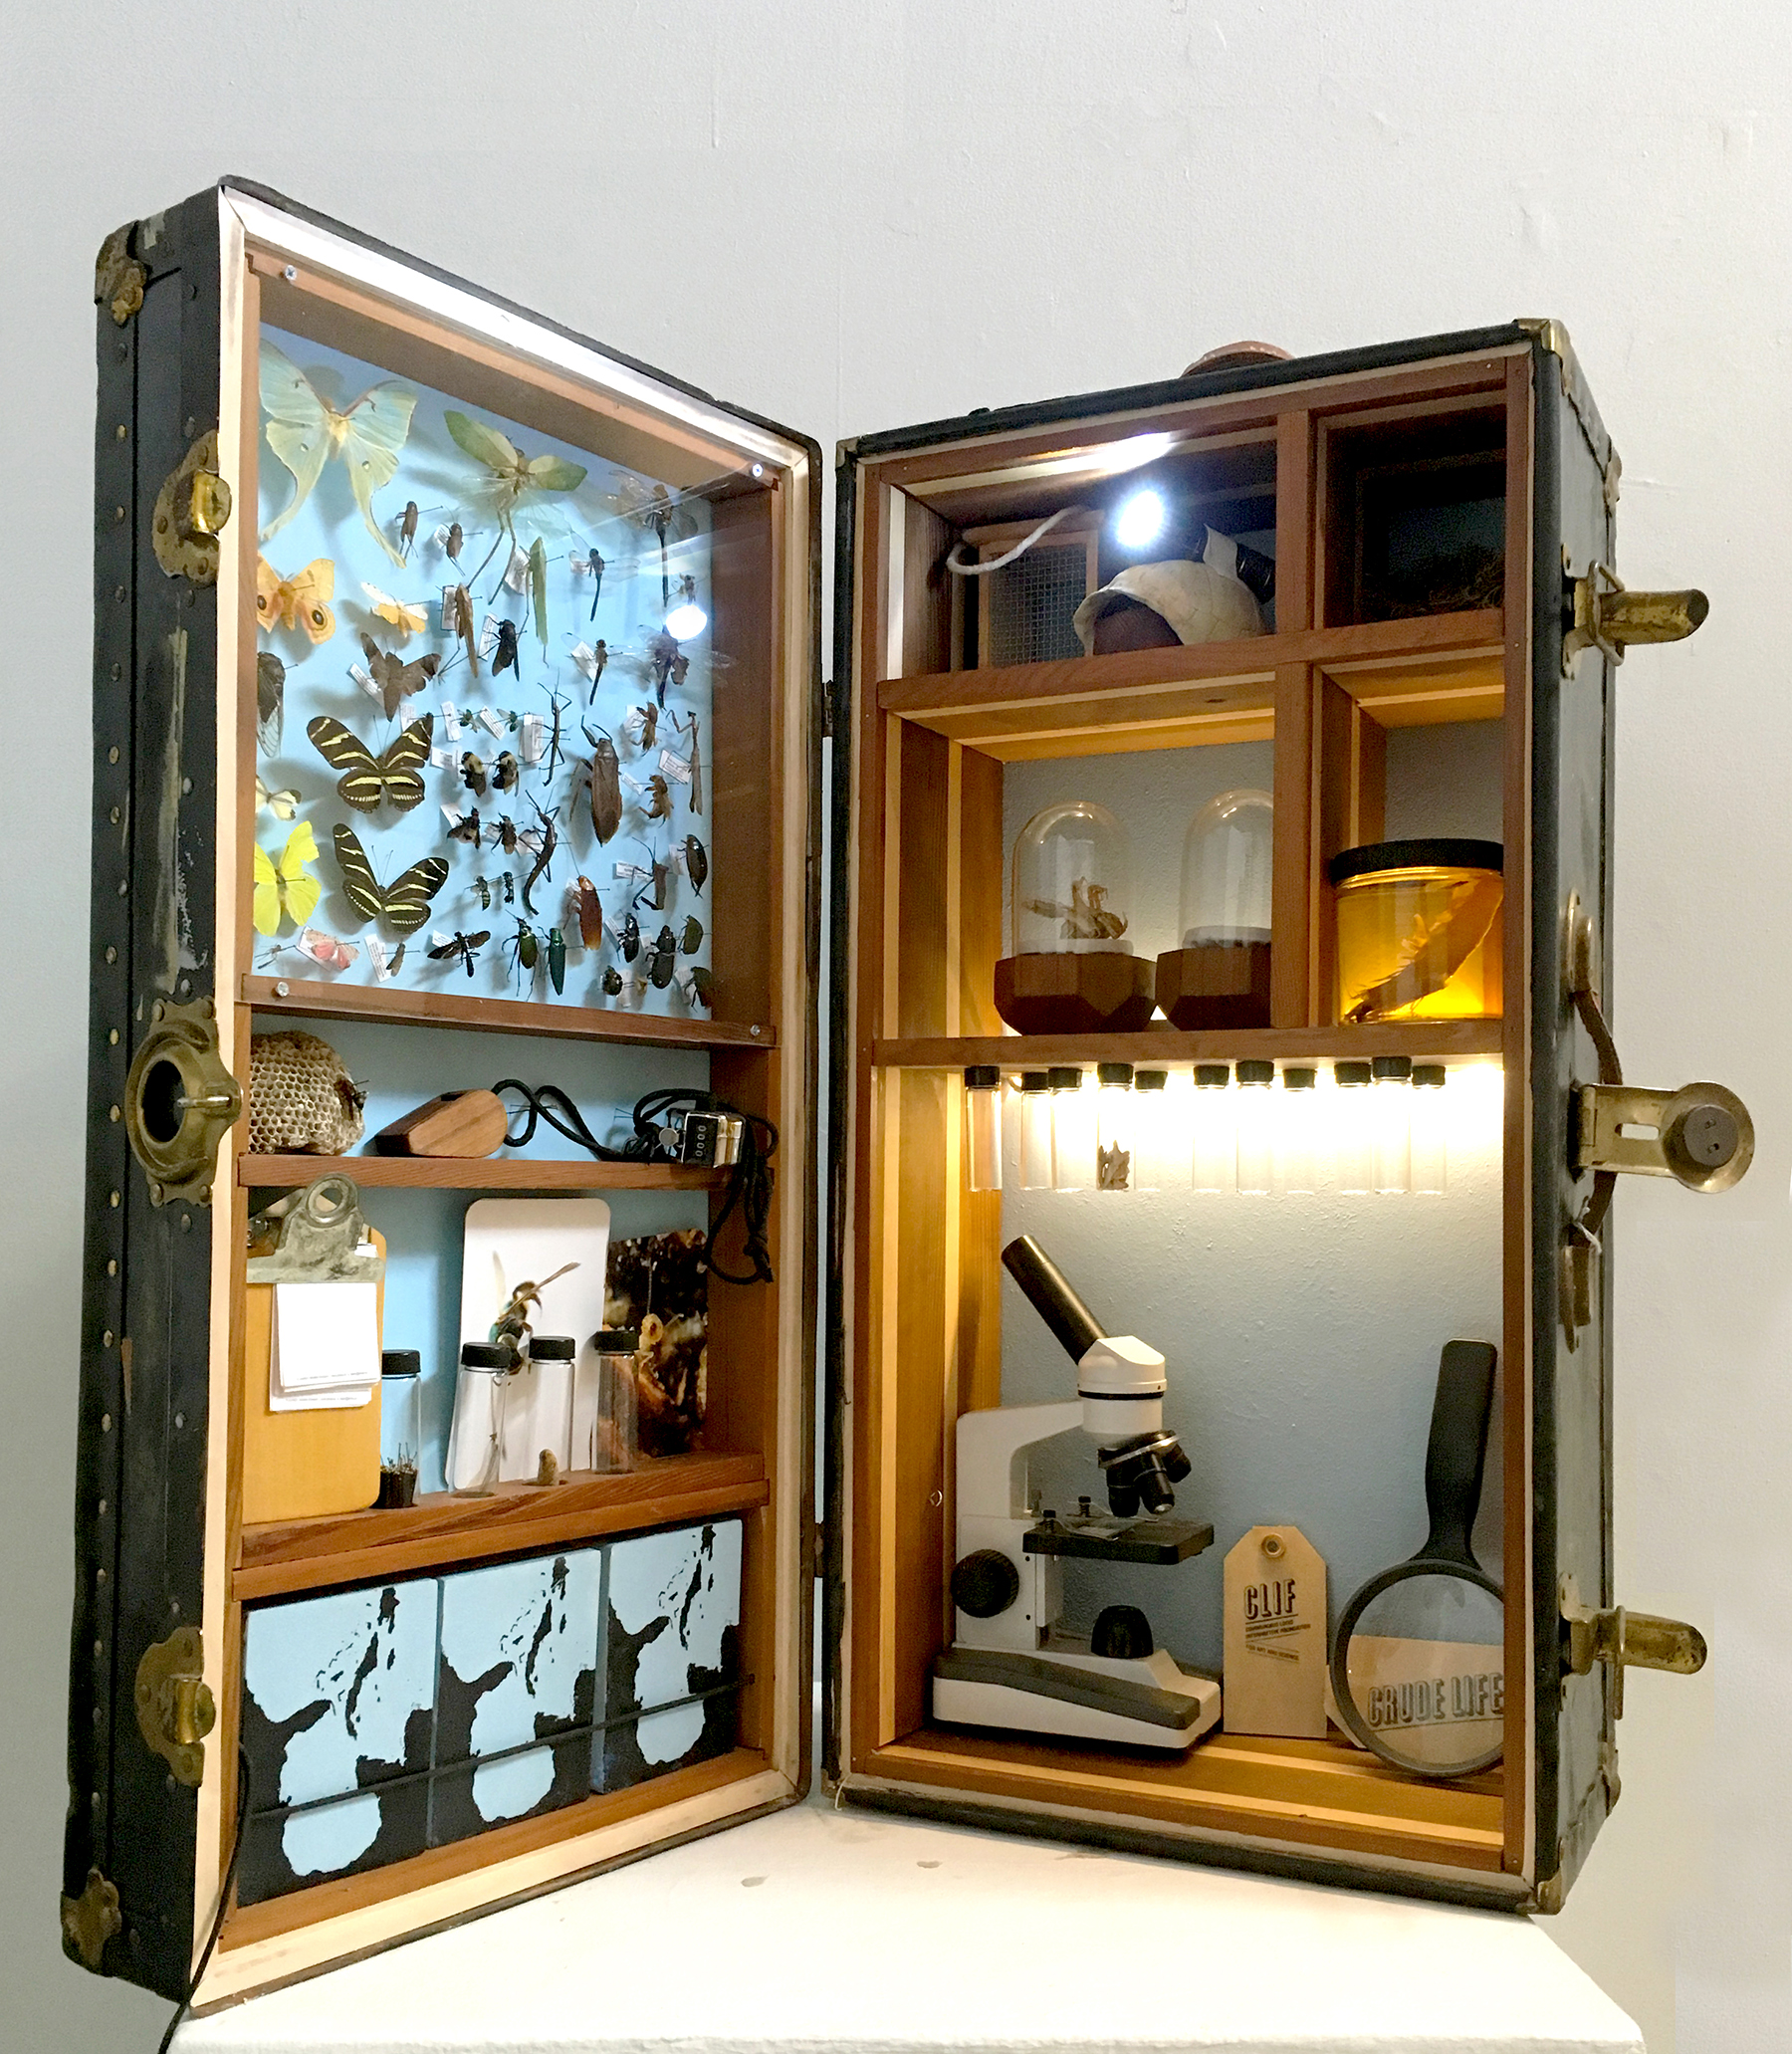 Crude Life Portable Biodiversity Museum for the Gulf of Mexico (Invertebrate Gallery), Sean Miller in collaboration with Brandon Ballengee , 2016 